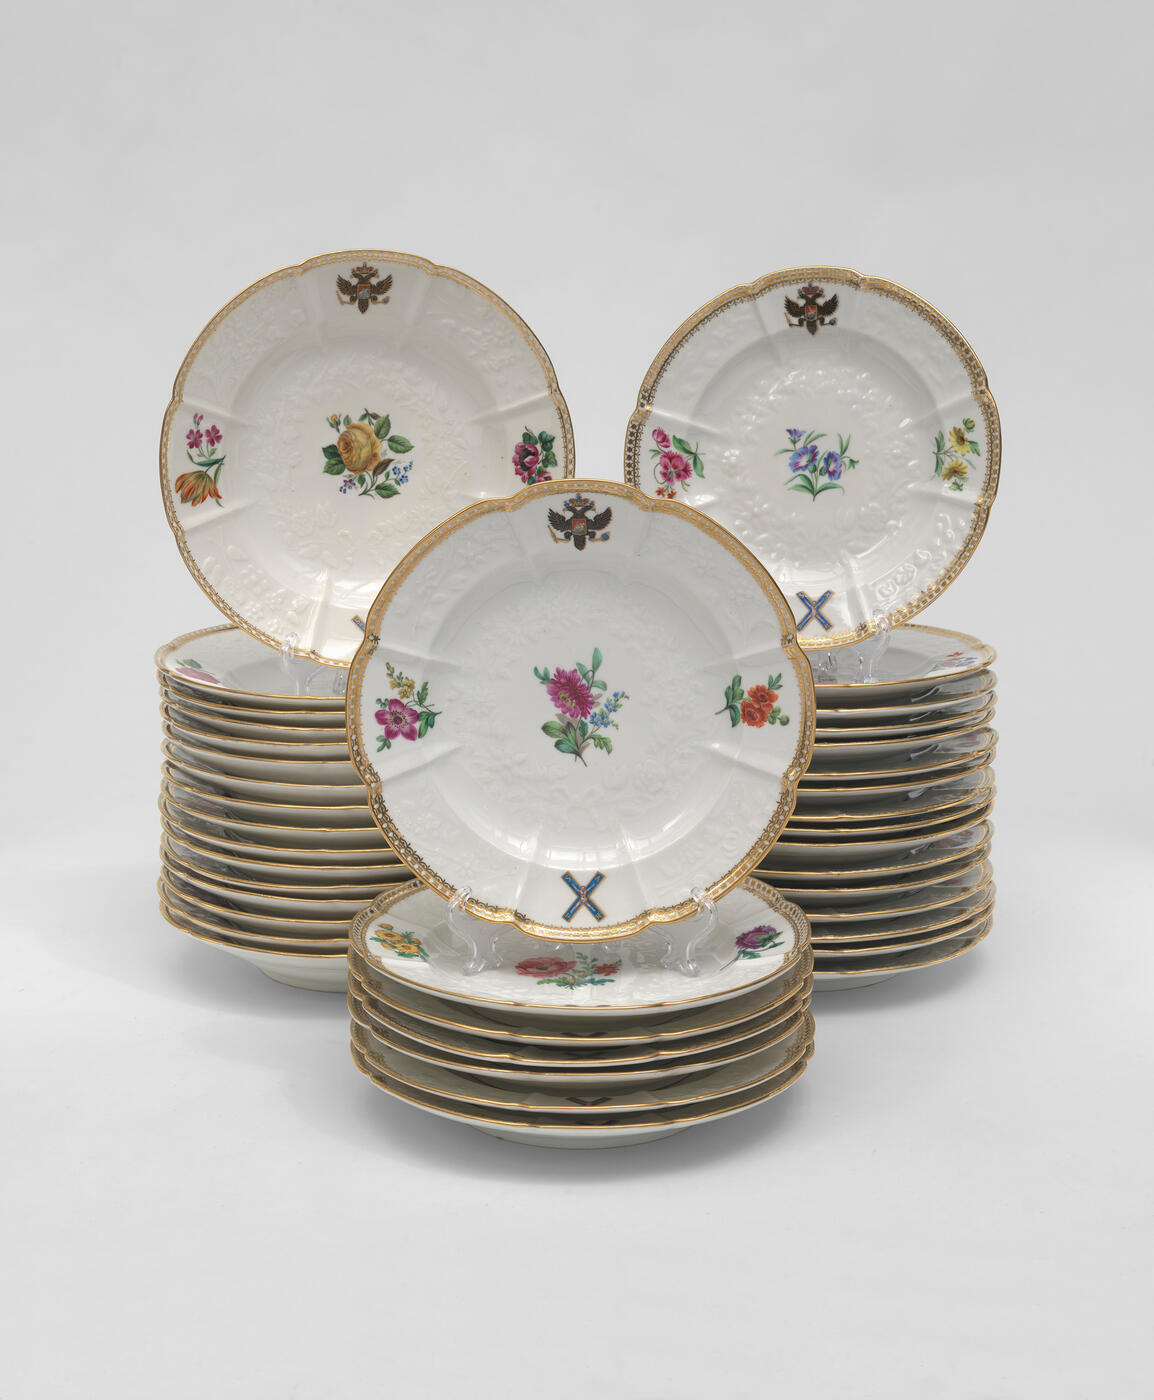 A Large Set of Plates from the St Andrew Service